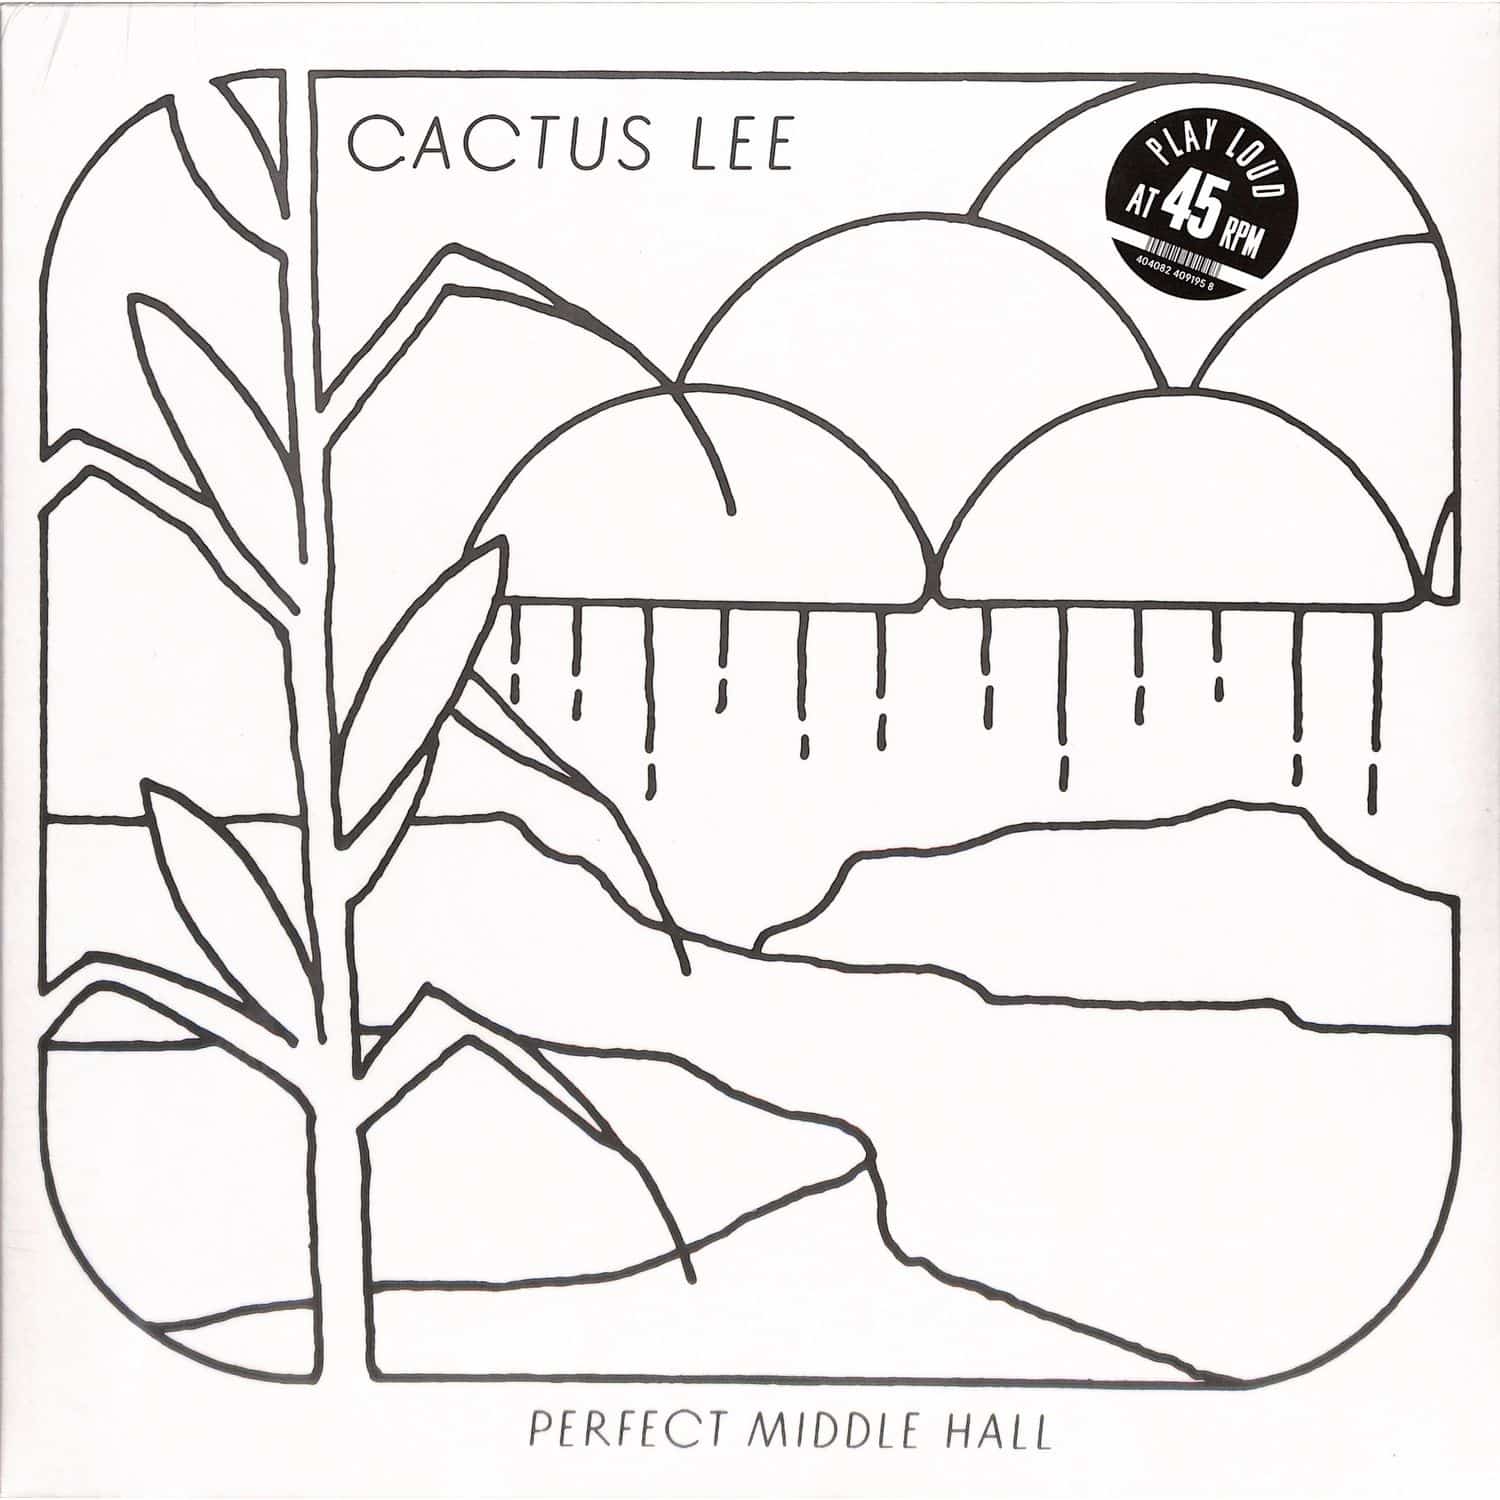 Cactus Lee - PERFECT MIDDLE HALL 